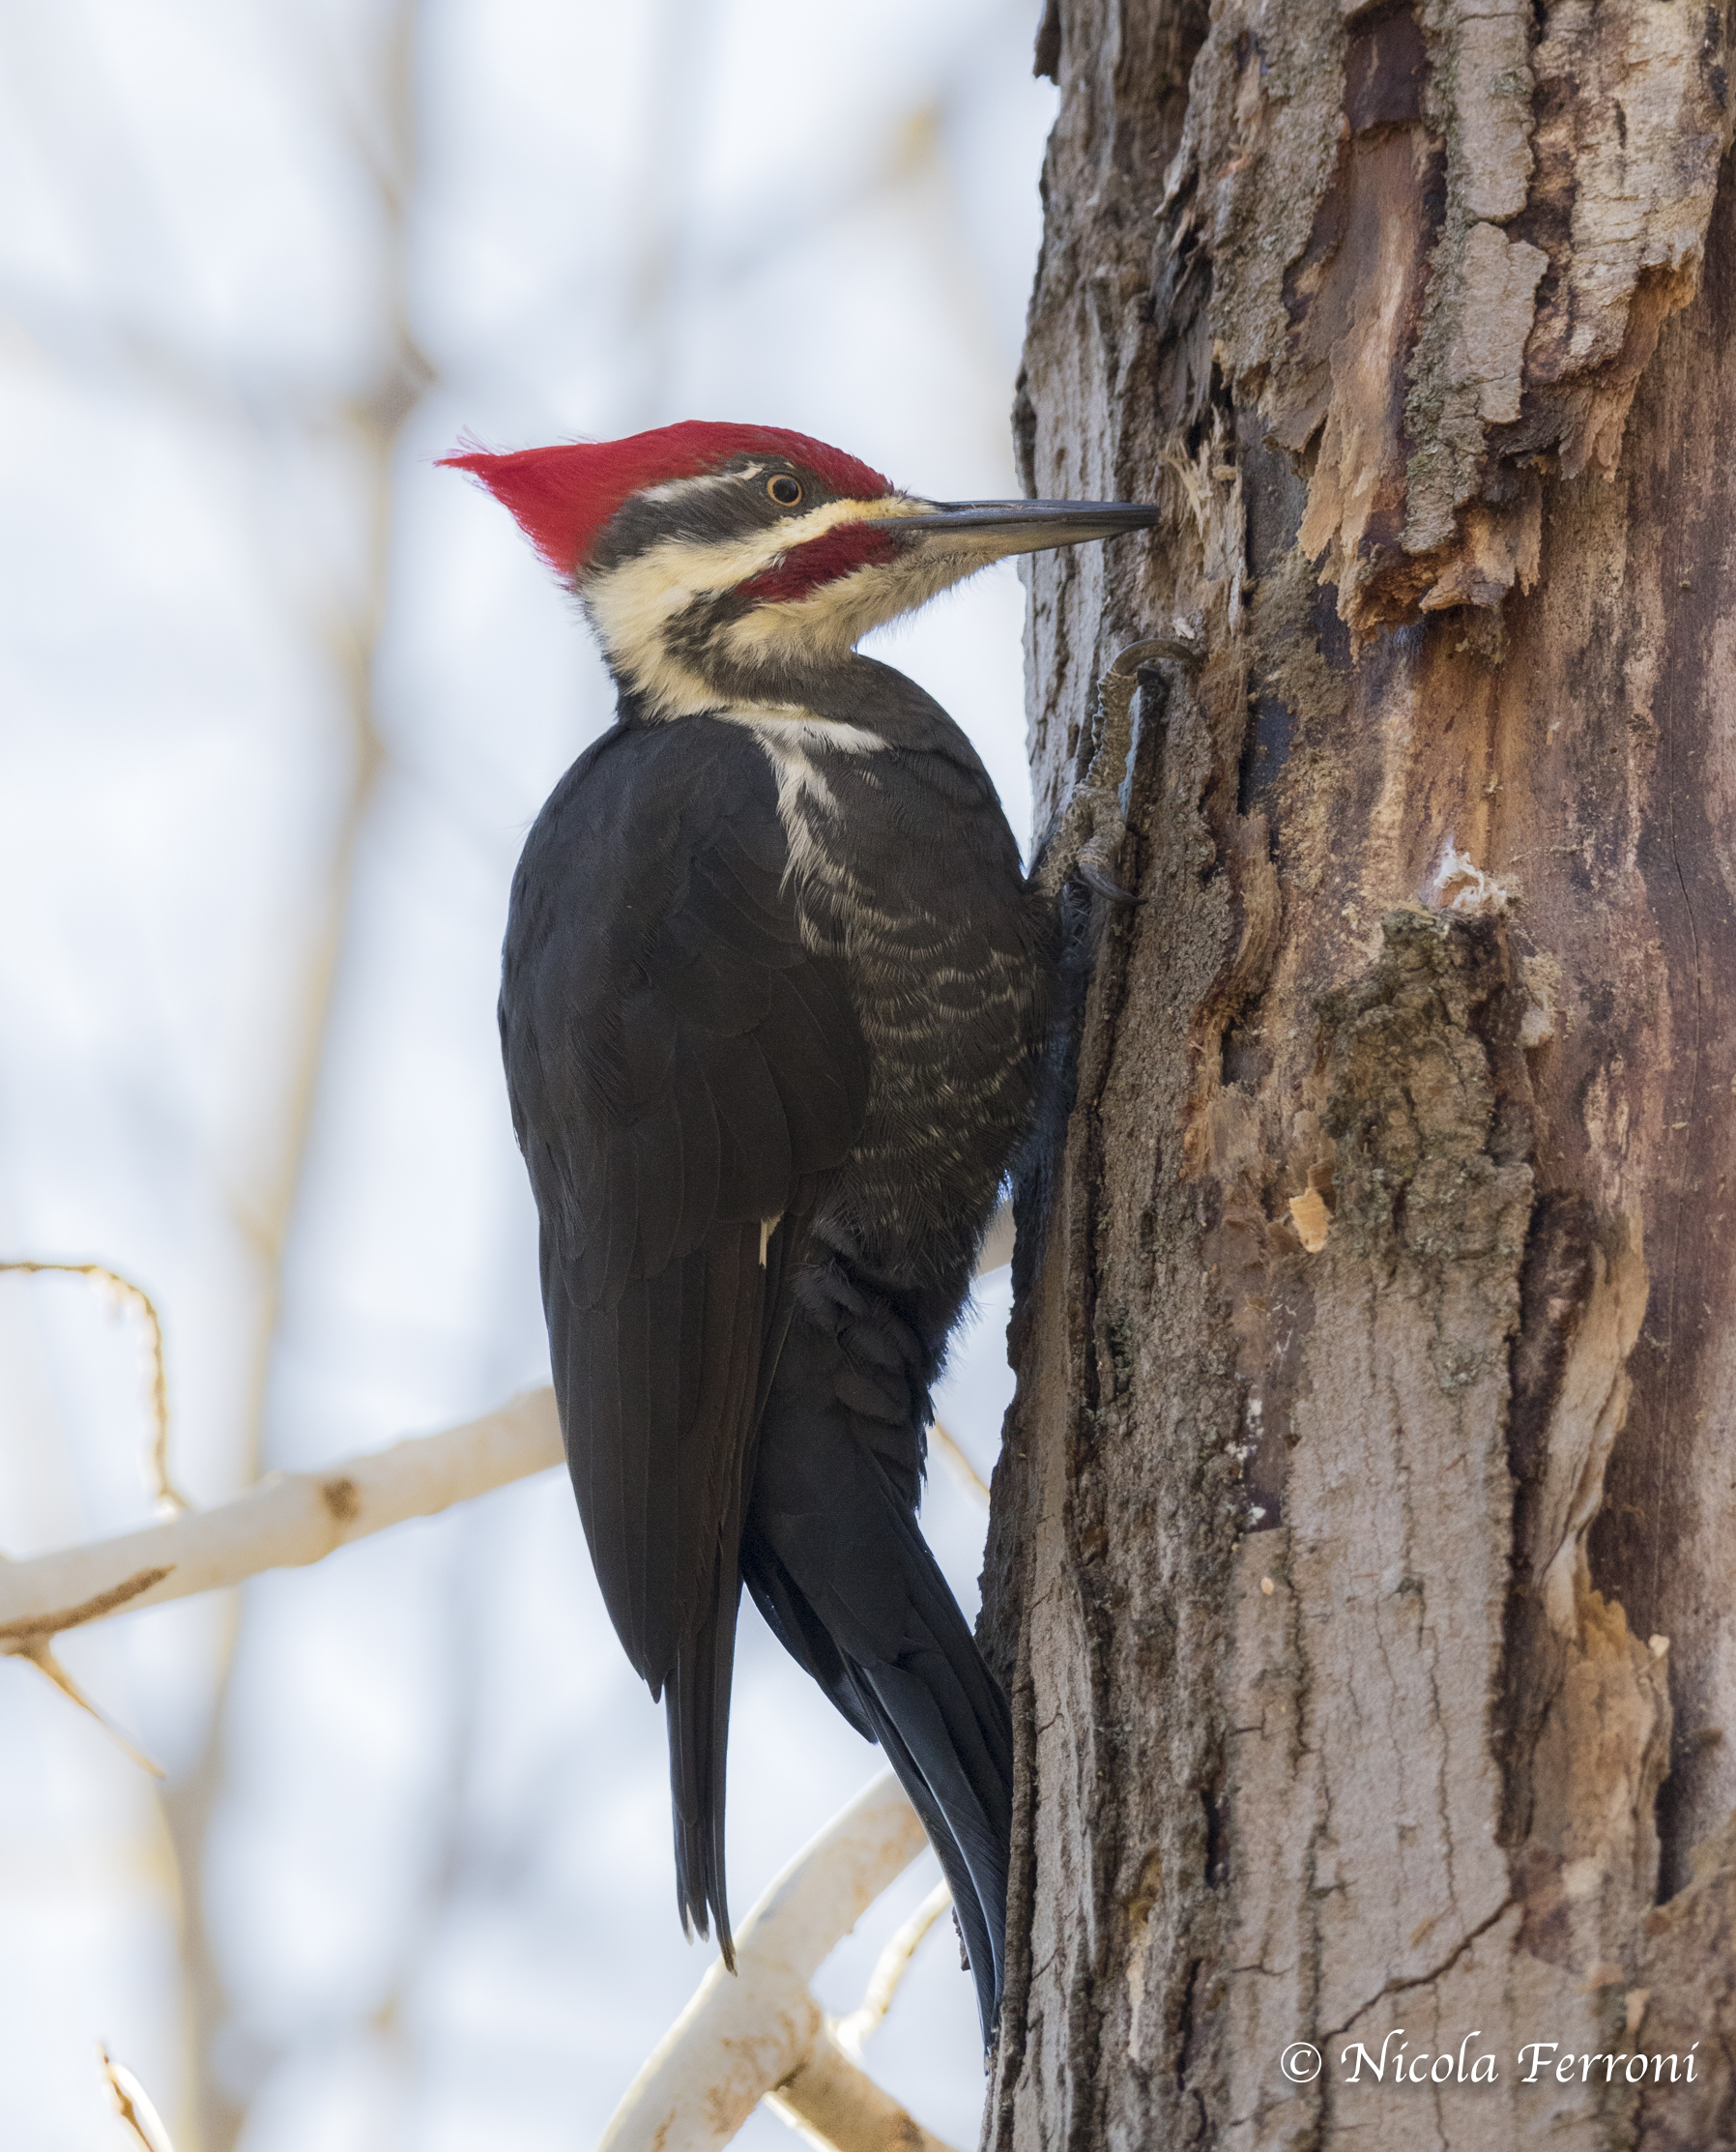 A great woodpeckers...